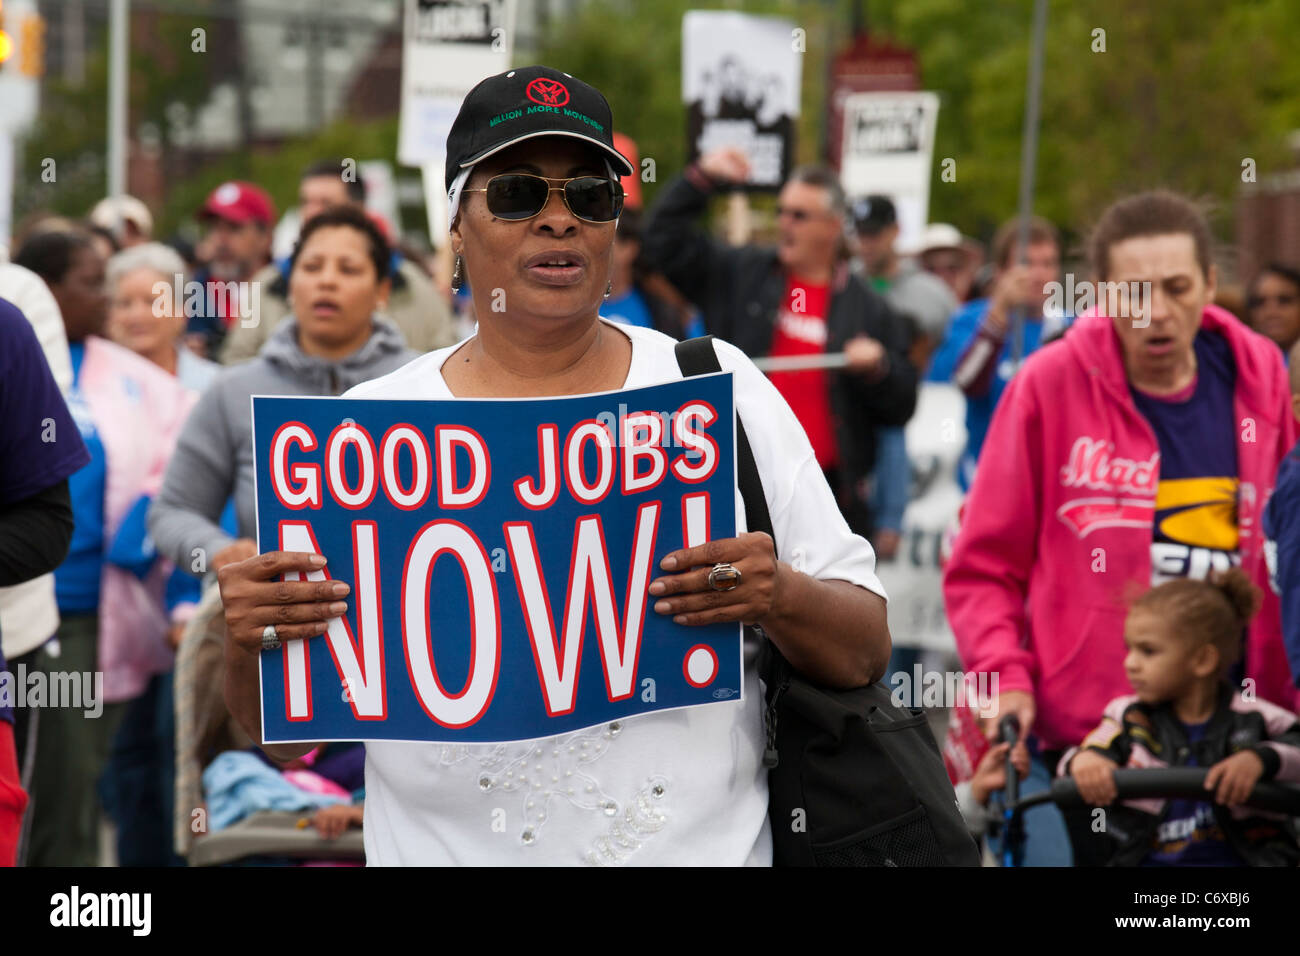 Detroit, Michigan - A woman holds a sign for 'Good Jobs Now' in the Labor Day parade. Stock Photo